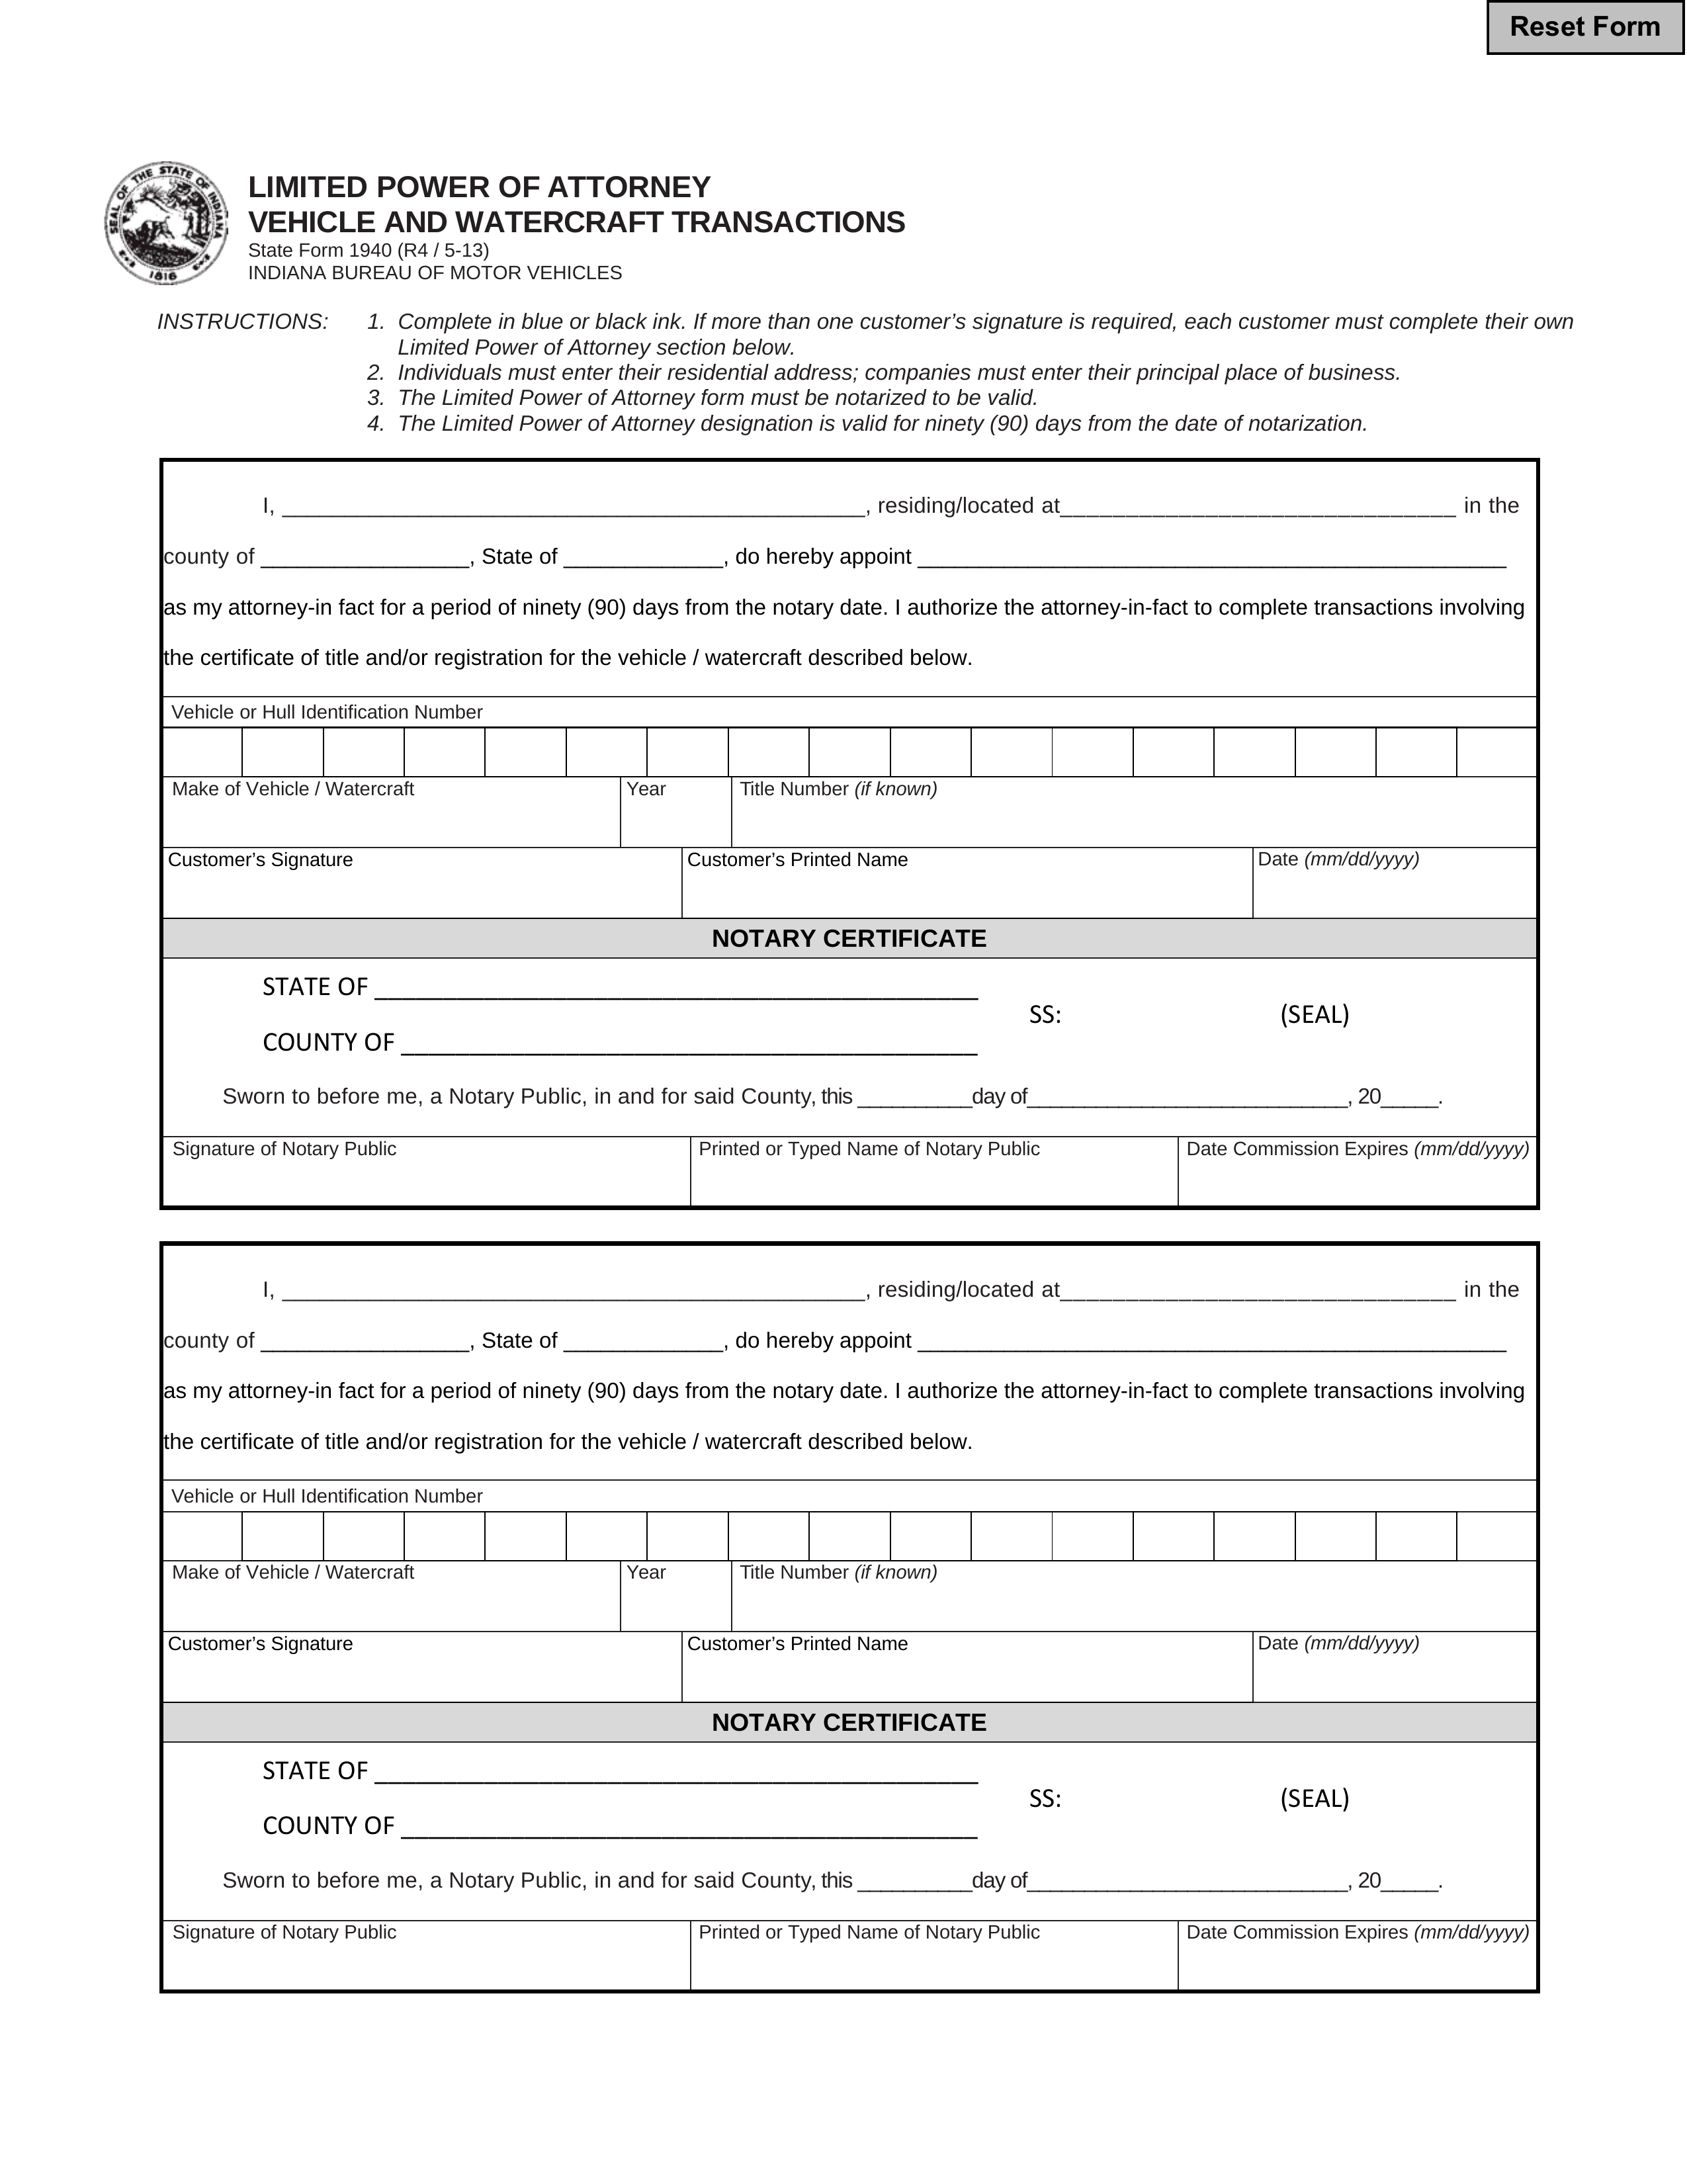 Free Indiana Motor Vehicle Power Of Attorney Form 01940 